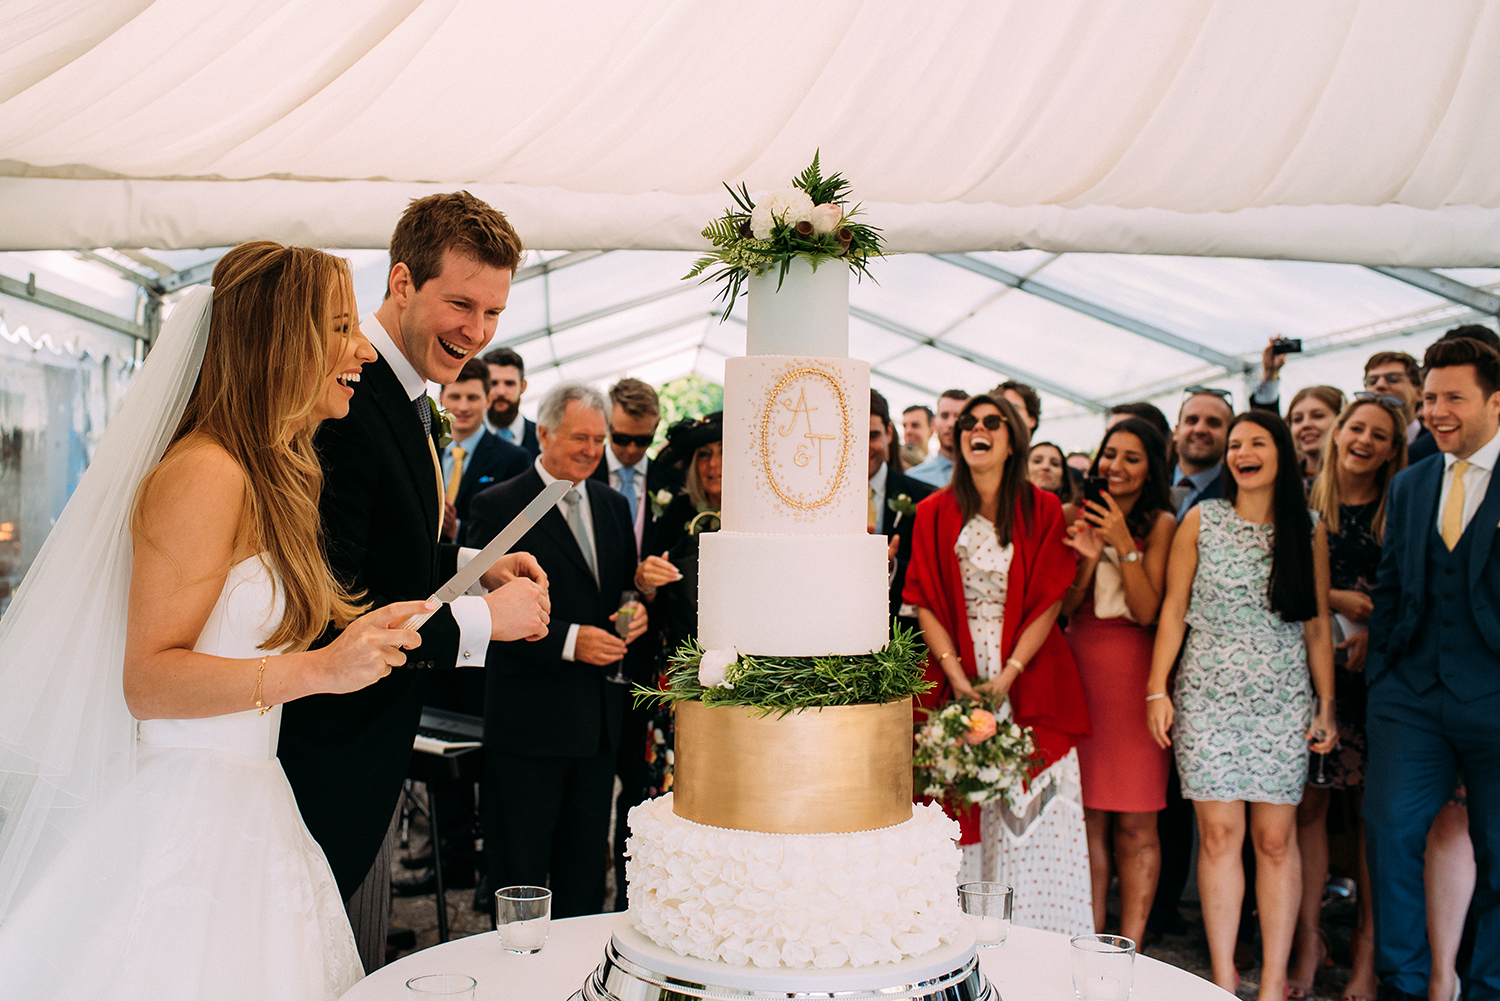  guest look on and laugh as they cut the cake 